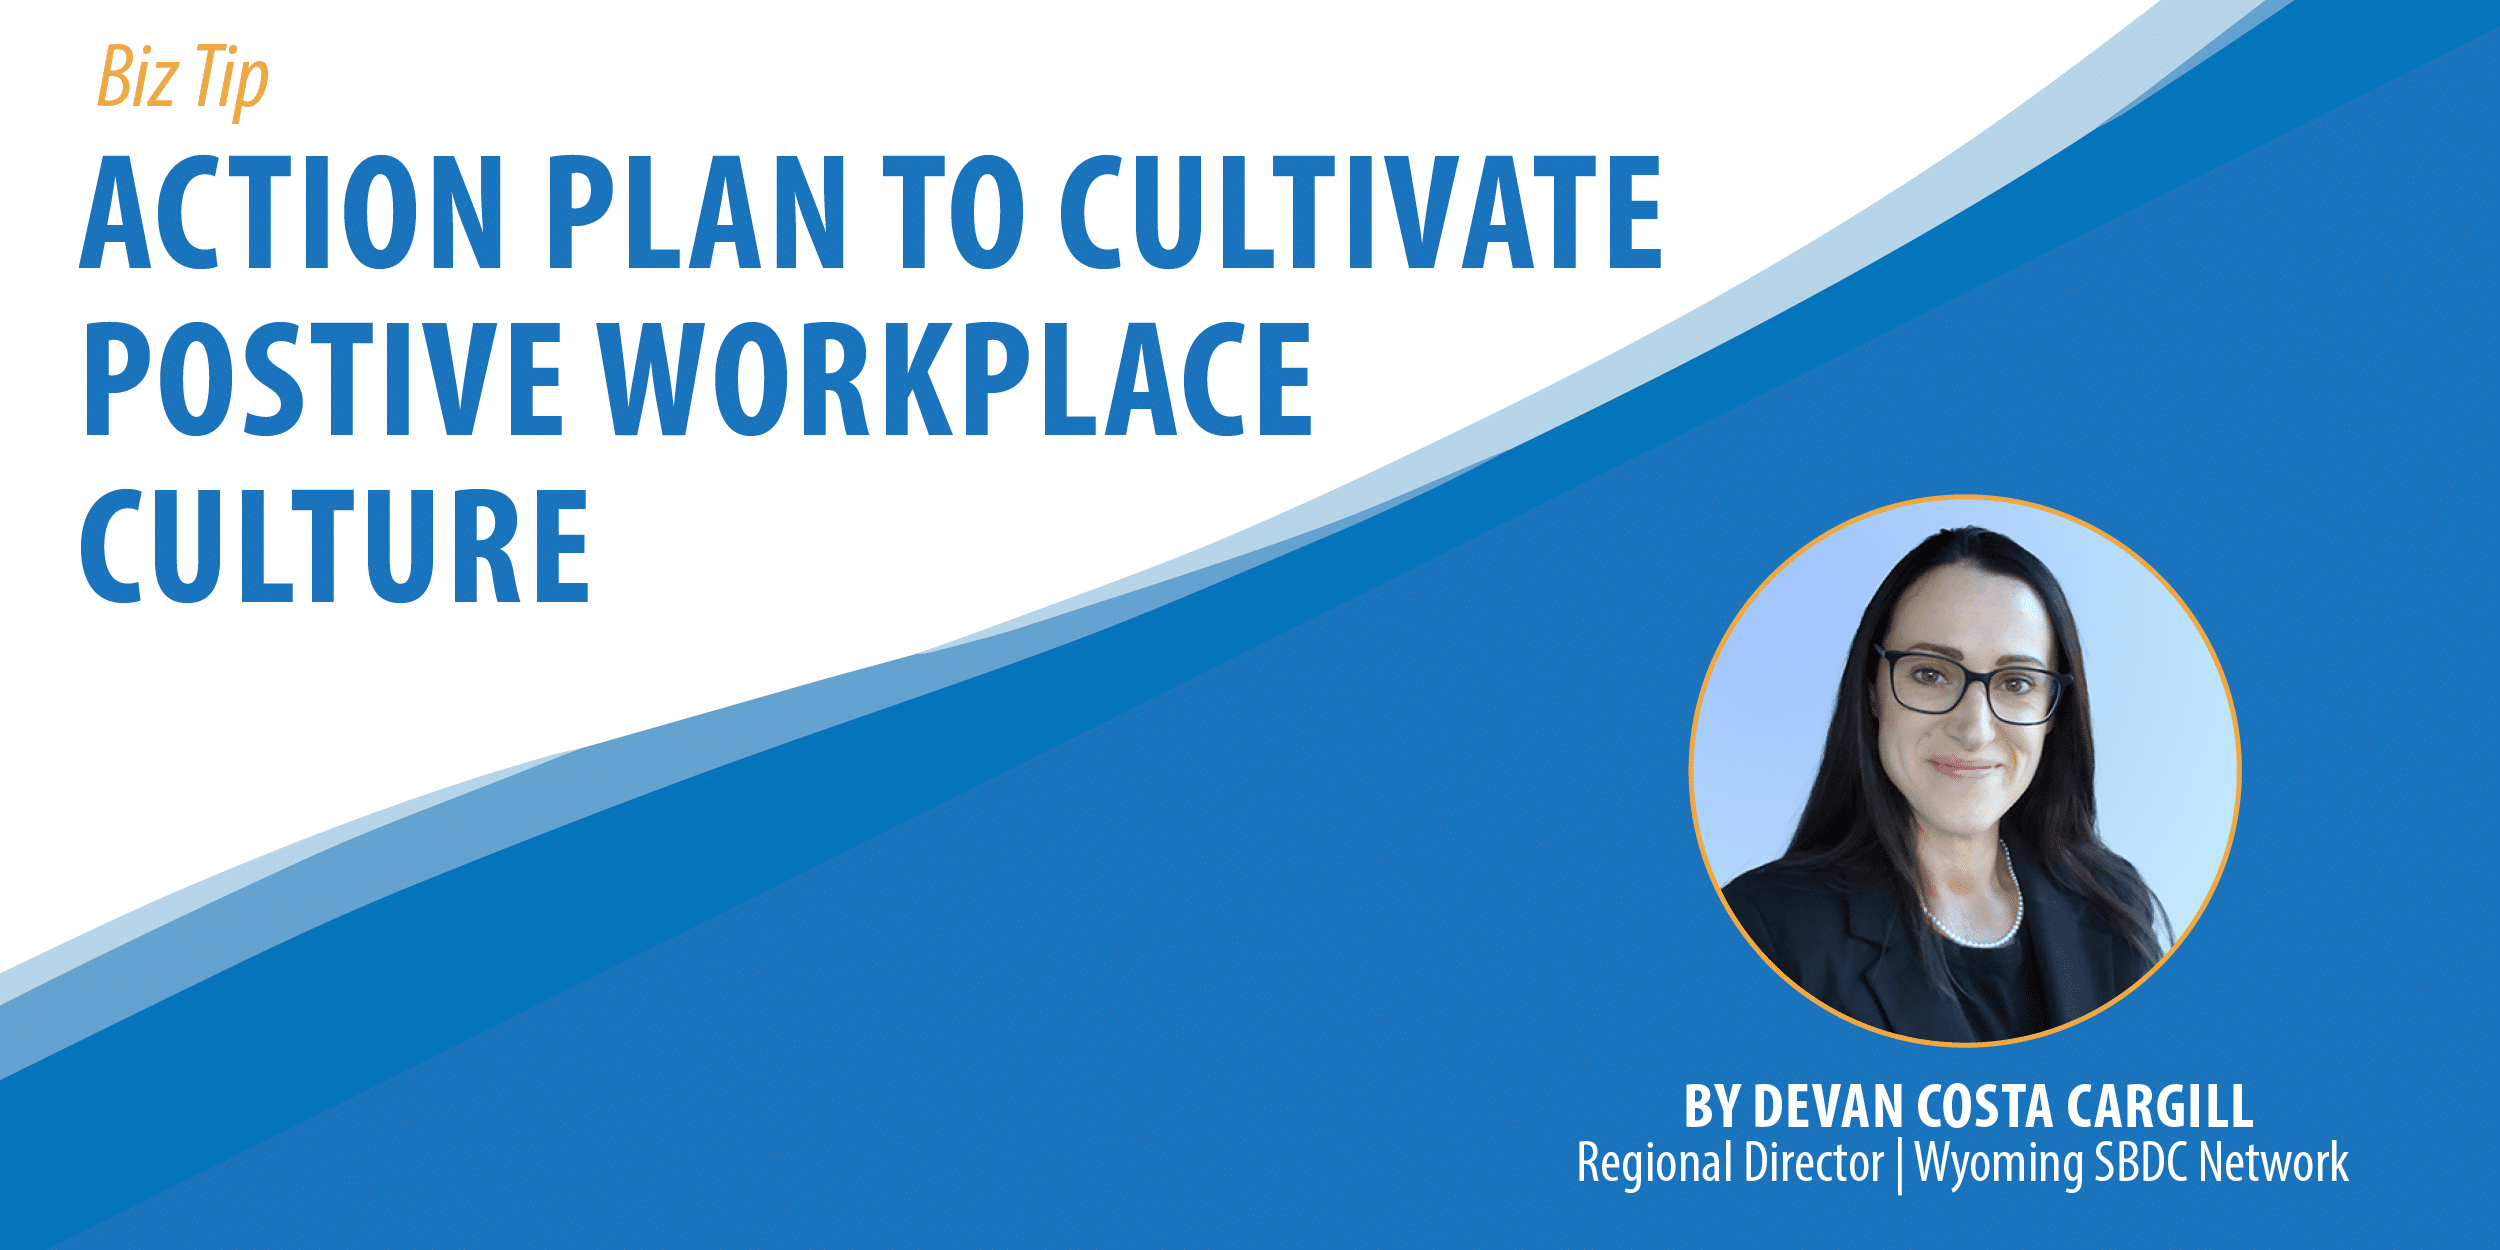 Action Plan To Cultivate Positive Workplace Culture